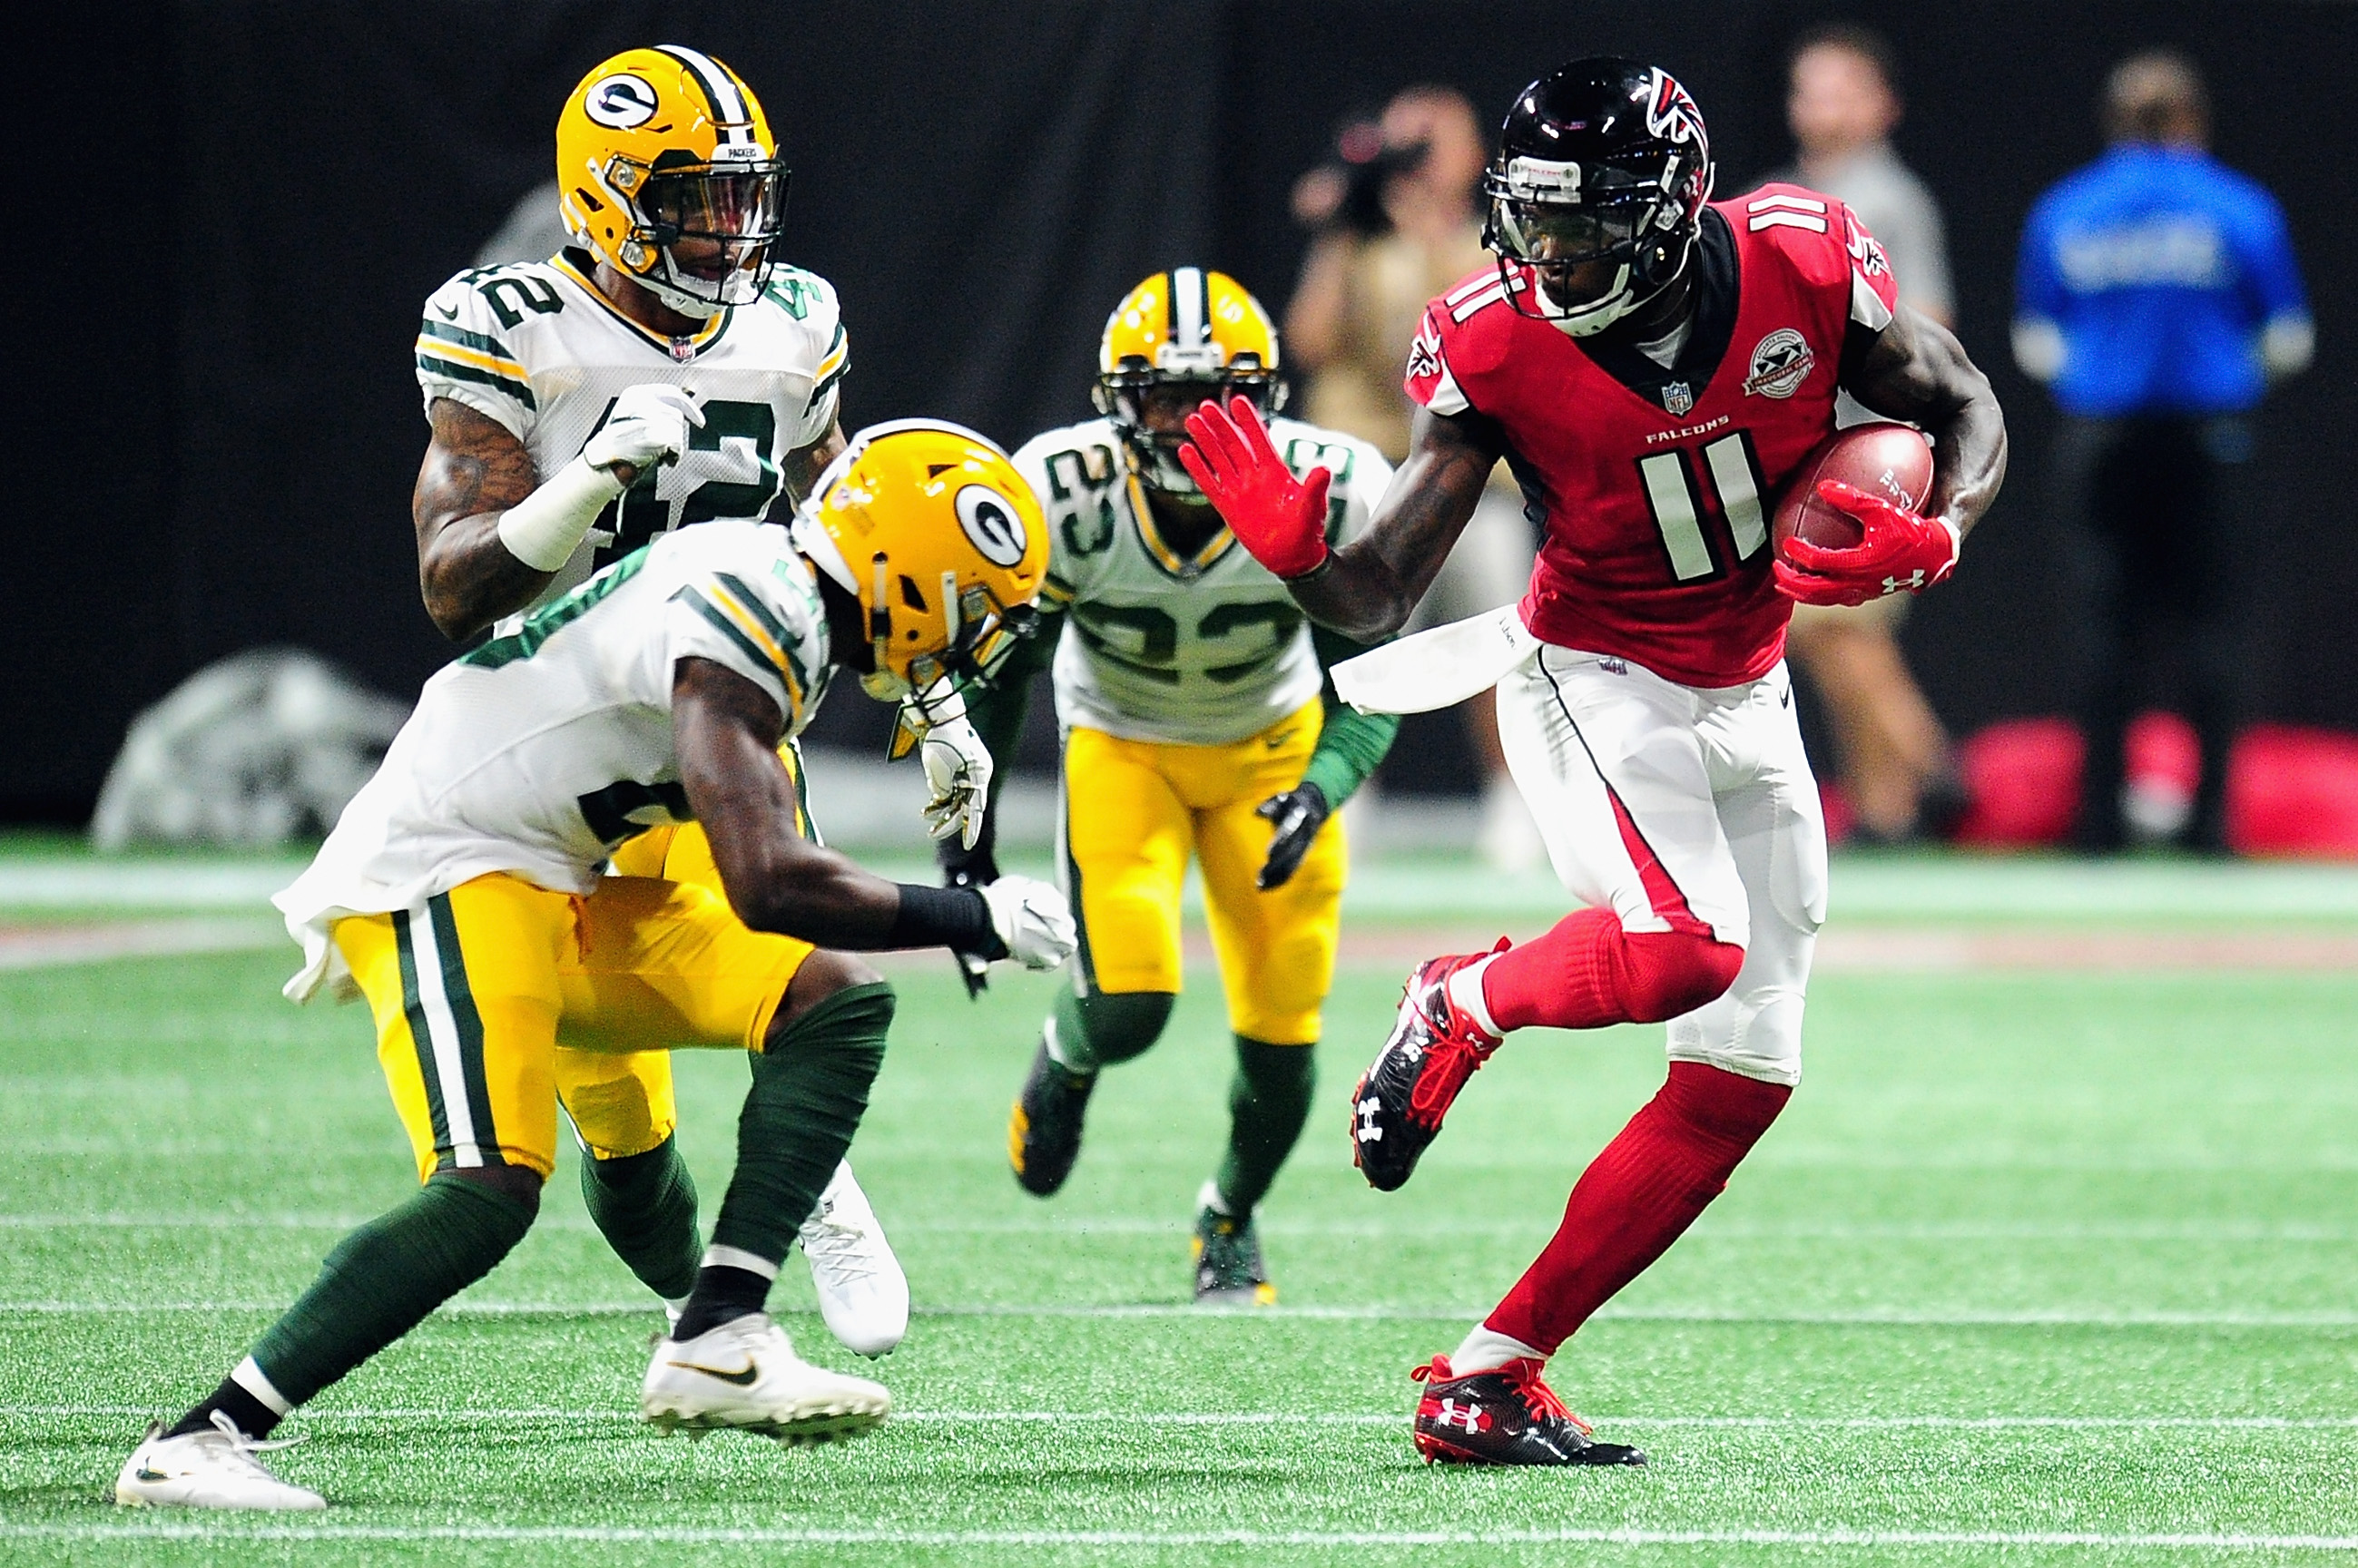 What time is the Green Bay Packers vs. Atlanta Falcons game